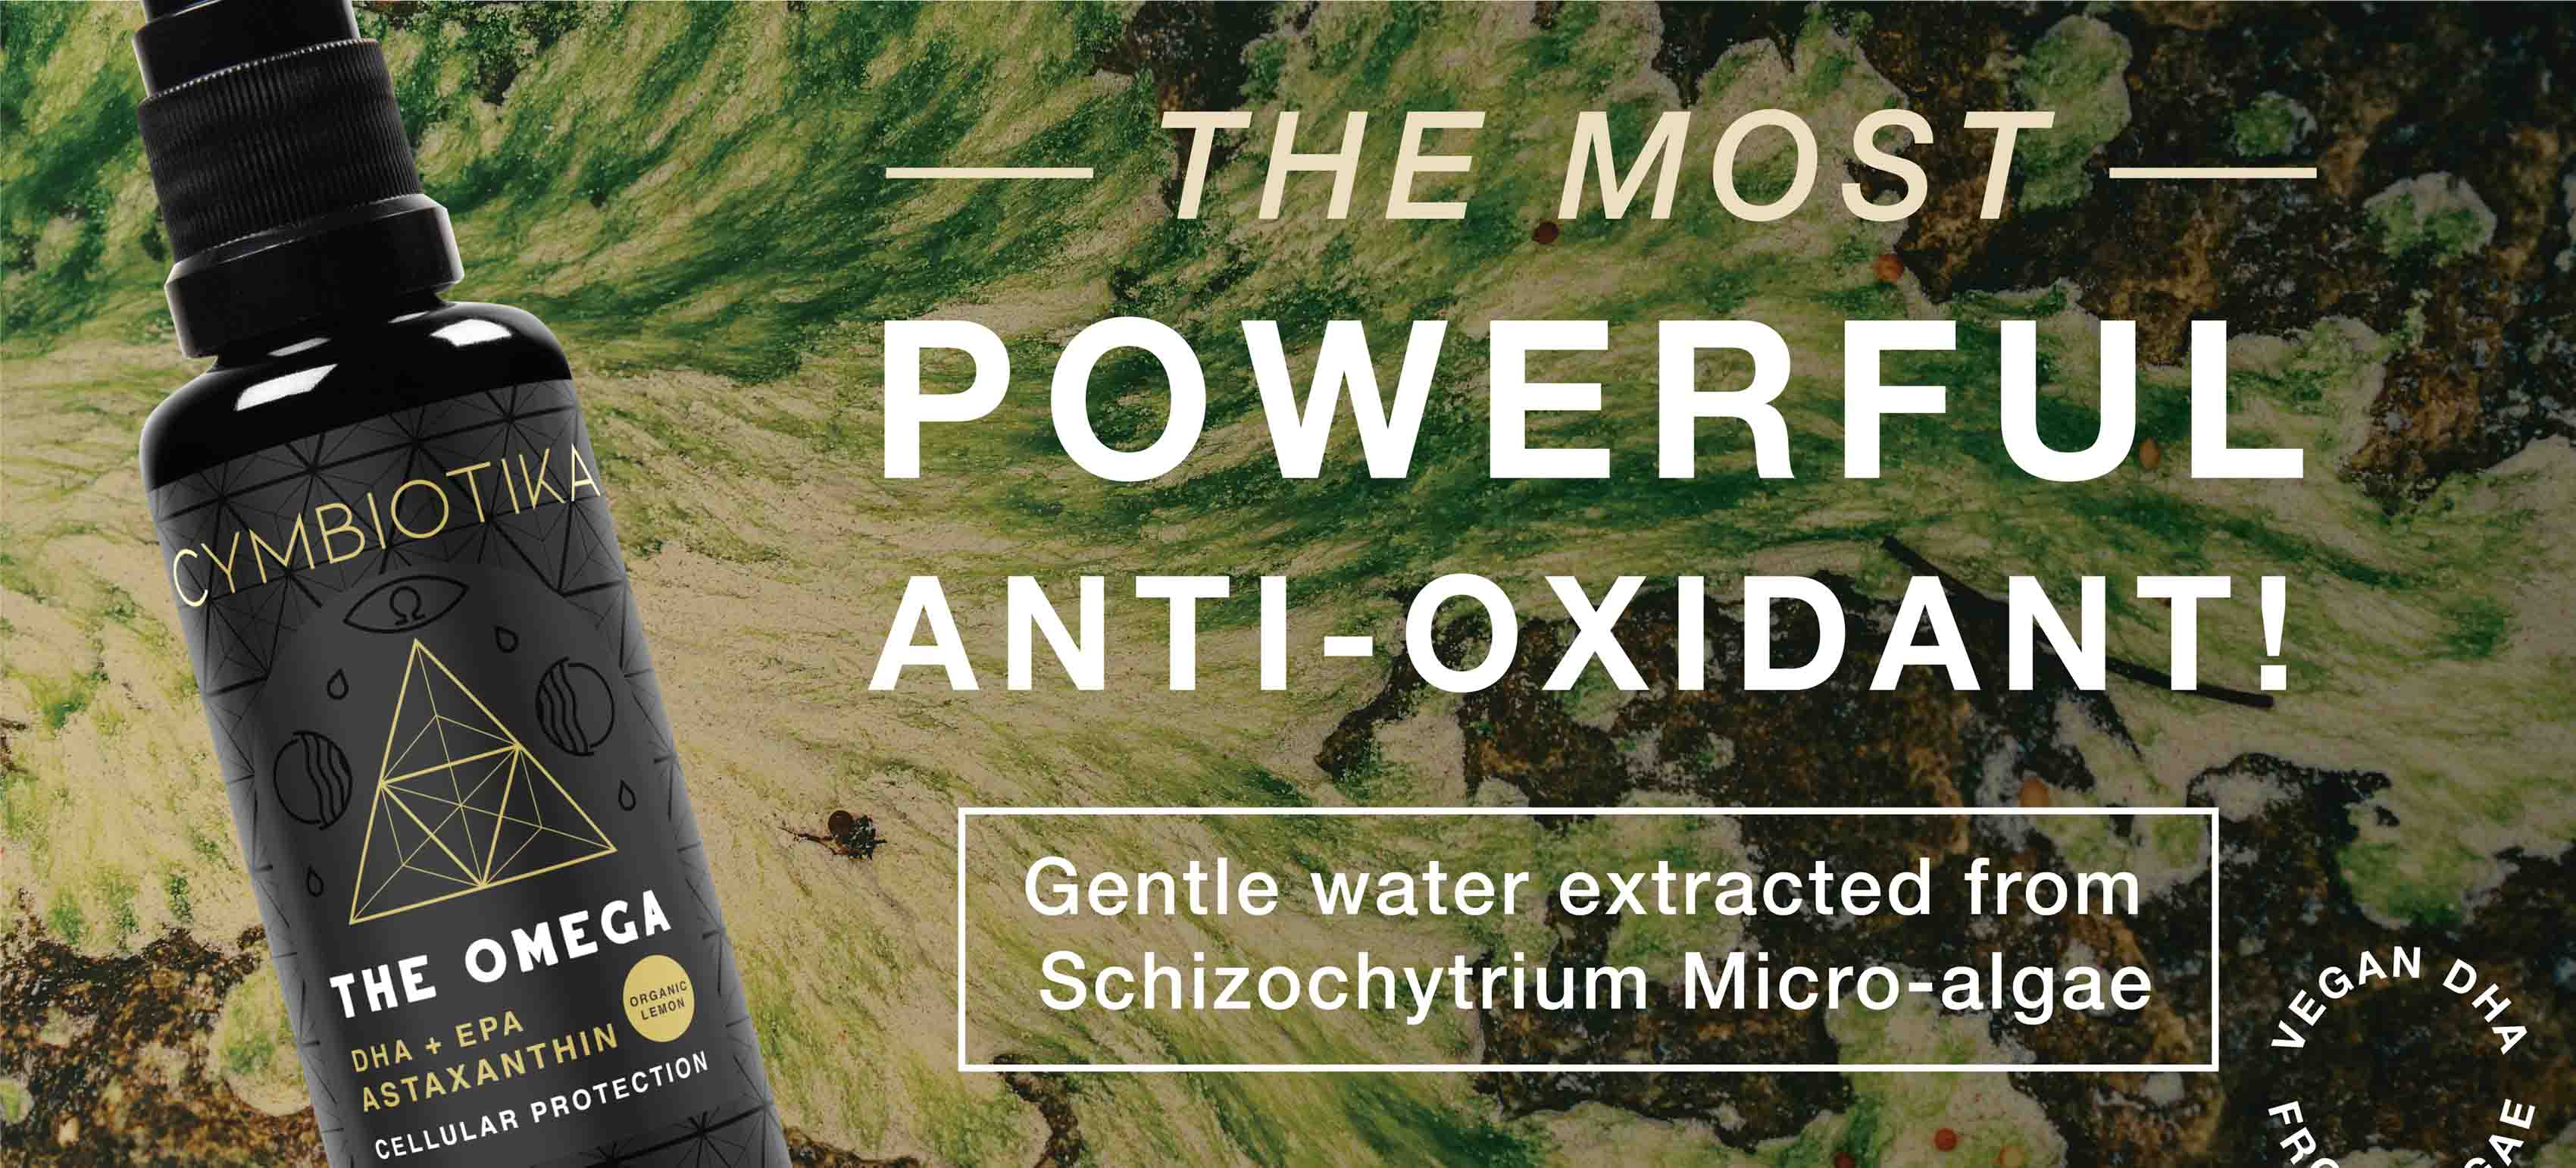 The most powerful antioxidant with gentle water extracted from Schizochytrium Micro-algae.